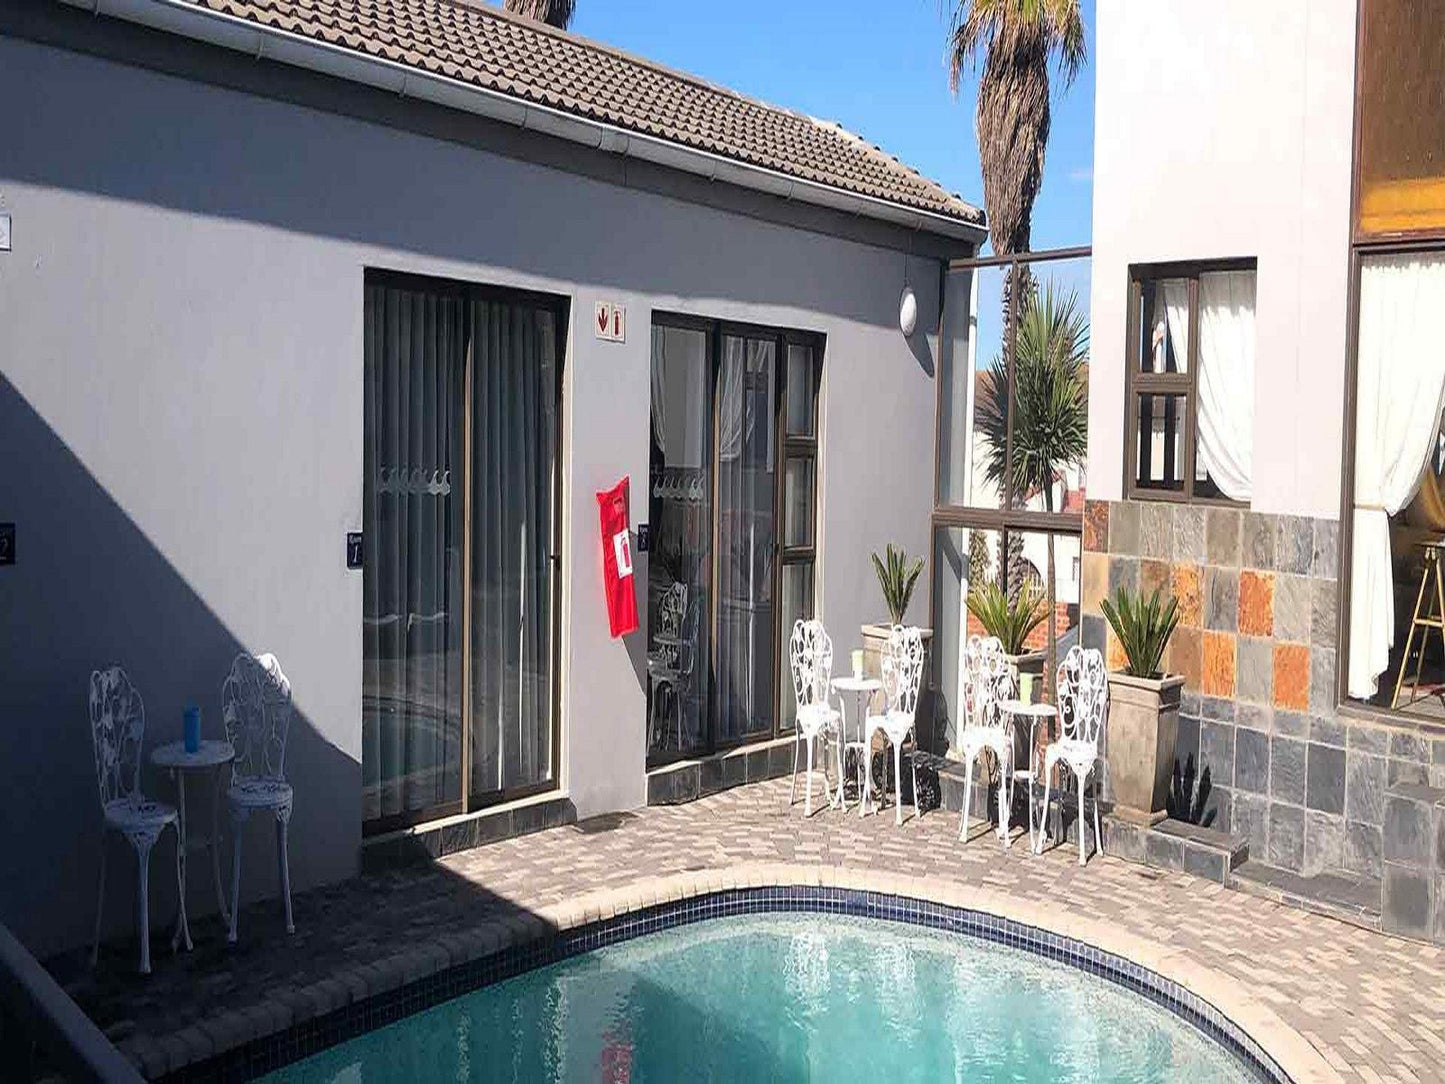 Le Blue Guest House Bluewater Bay Port Elizabeth Eastern Cape South Africa House, Building, Architecture, Swimming Pool